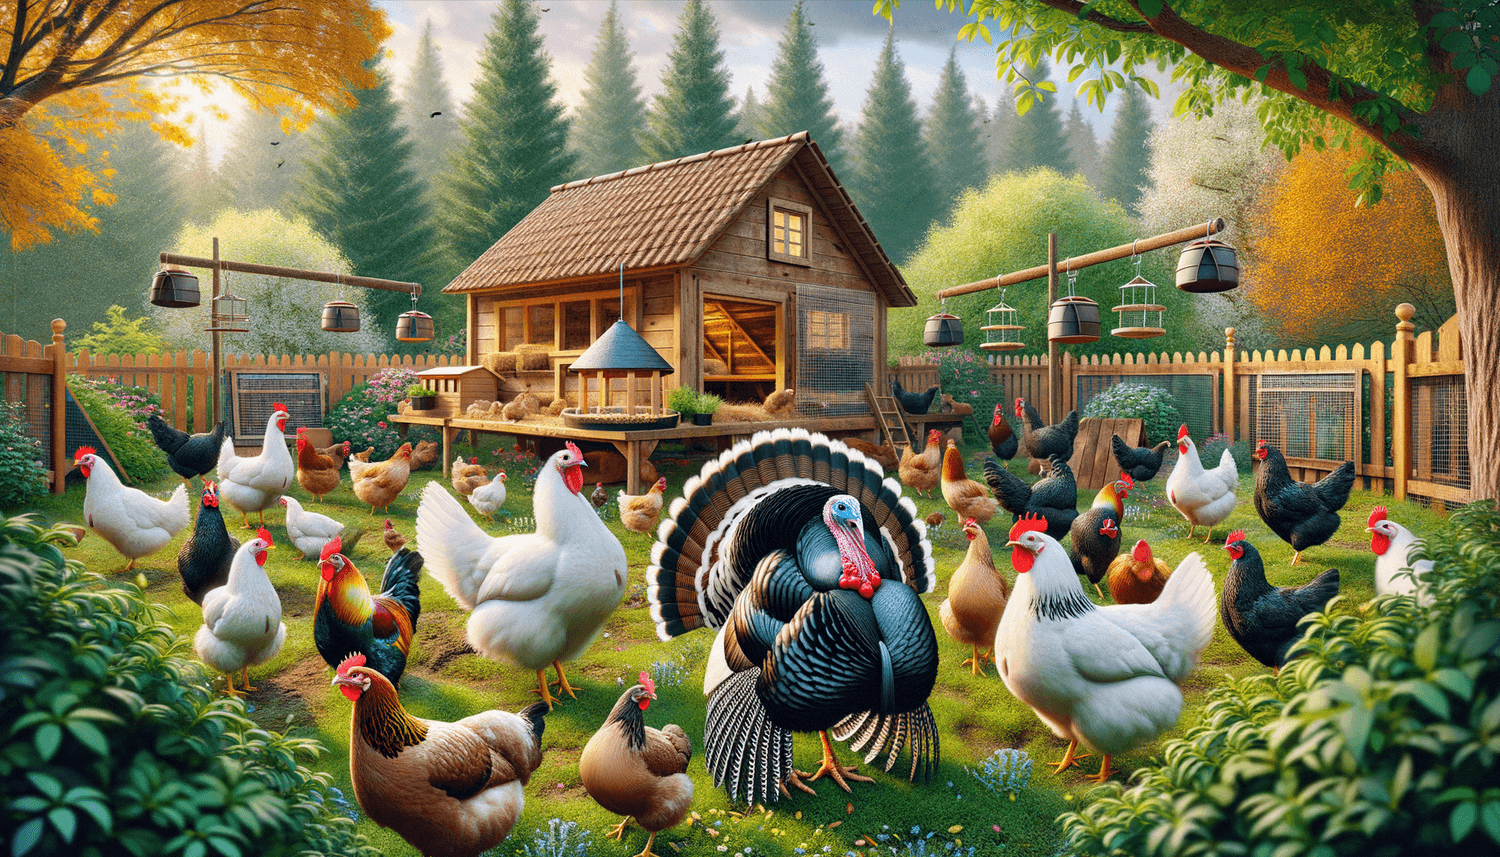 Can Turkeys and Chickens Live Together?